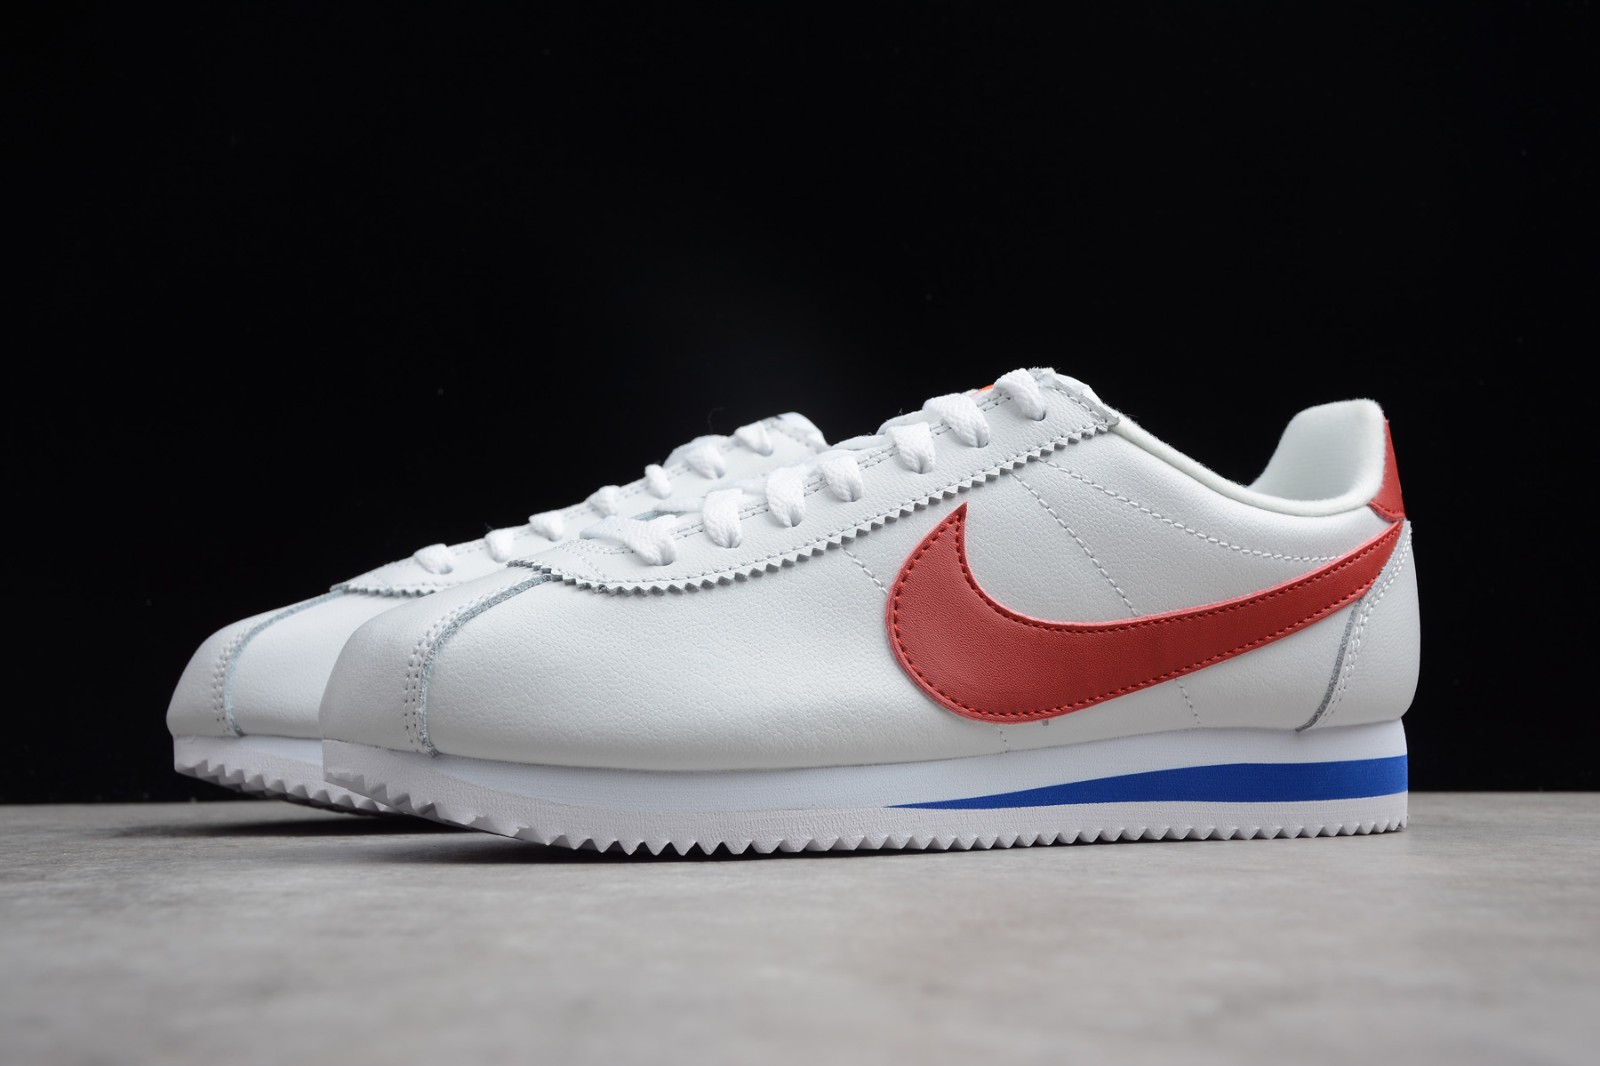 mens nike sneakers with silver swoosh blue hair - Nike Classic Cortez Forrest Gump White Varsity Red Varsity Royal 902801 100 - MultiscaleconsultingShops